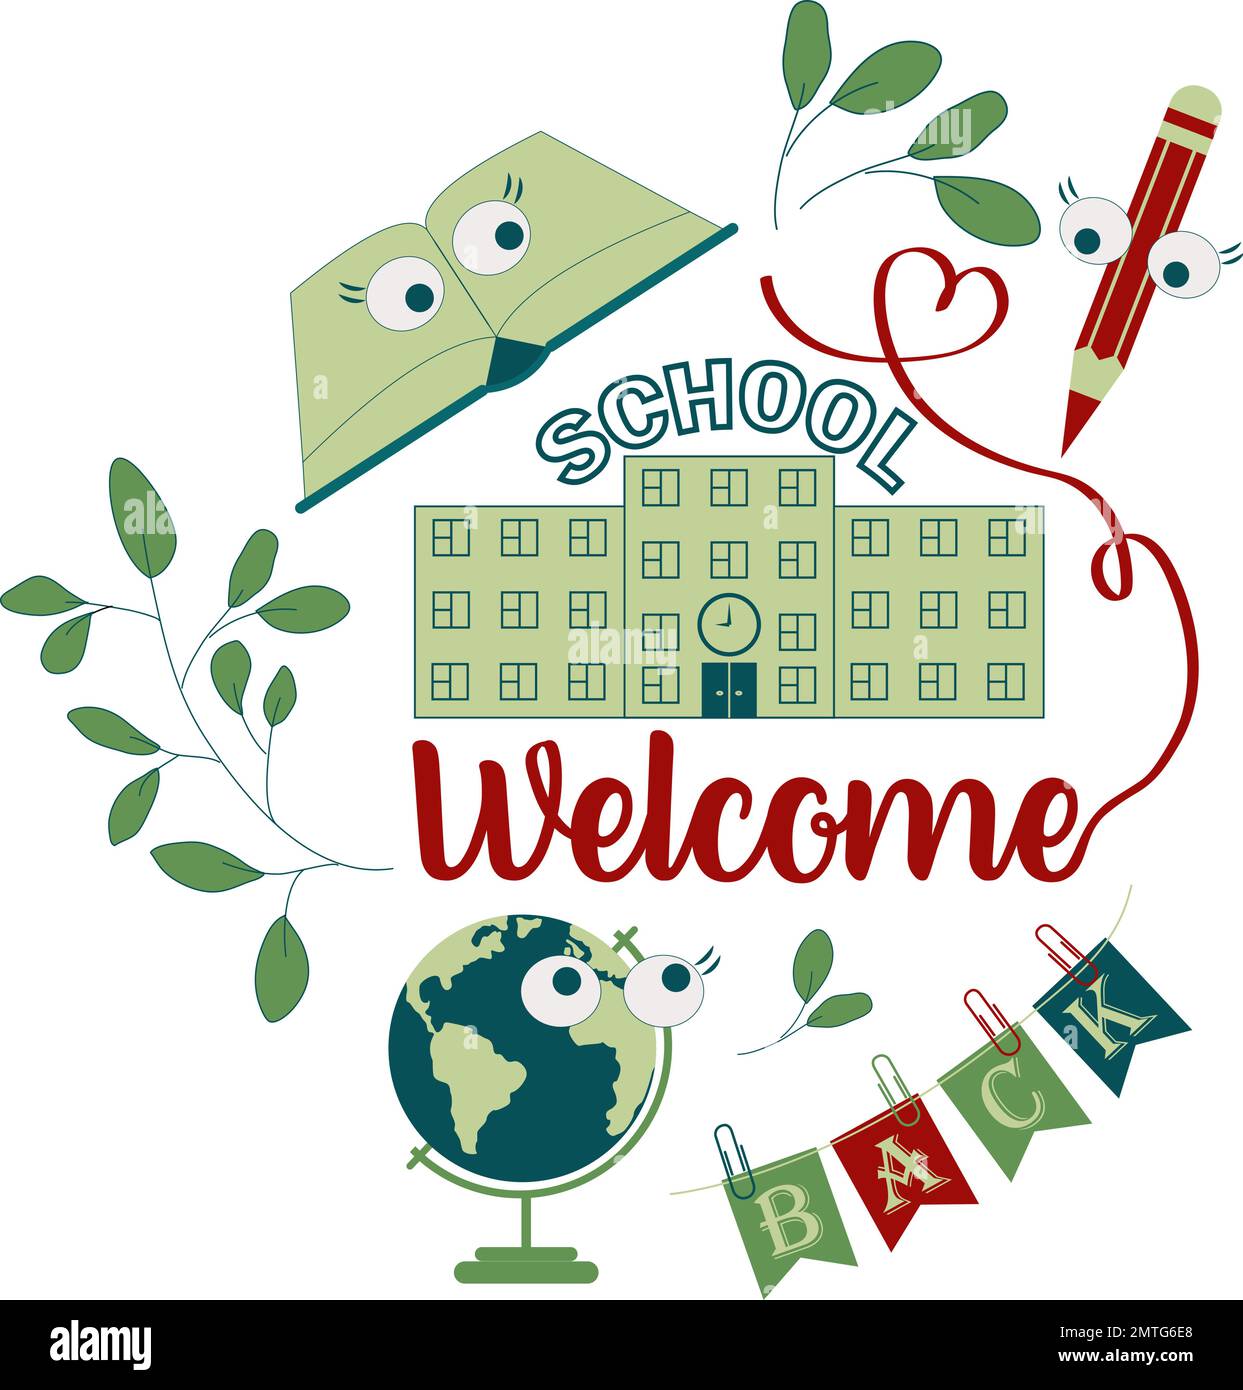 Welcome classes Cut Out Stock Images & Pictures - Alamy